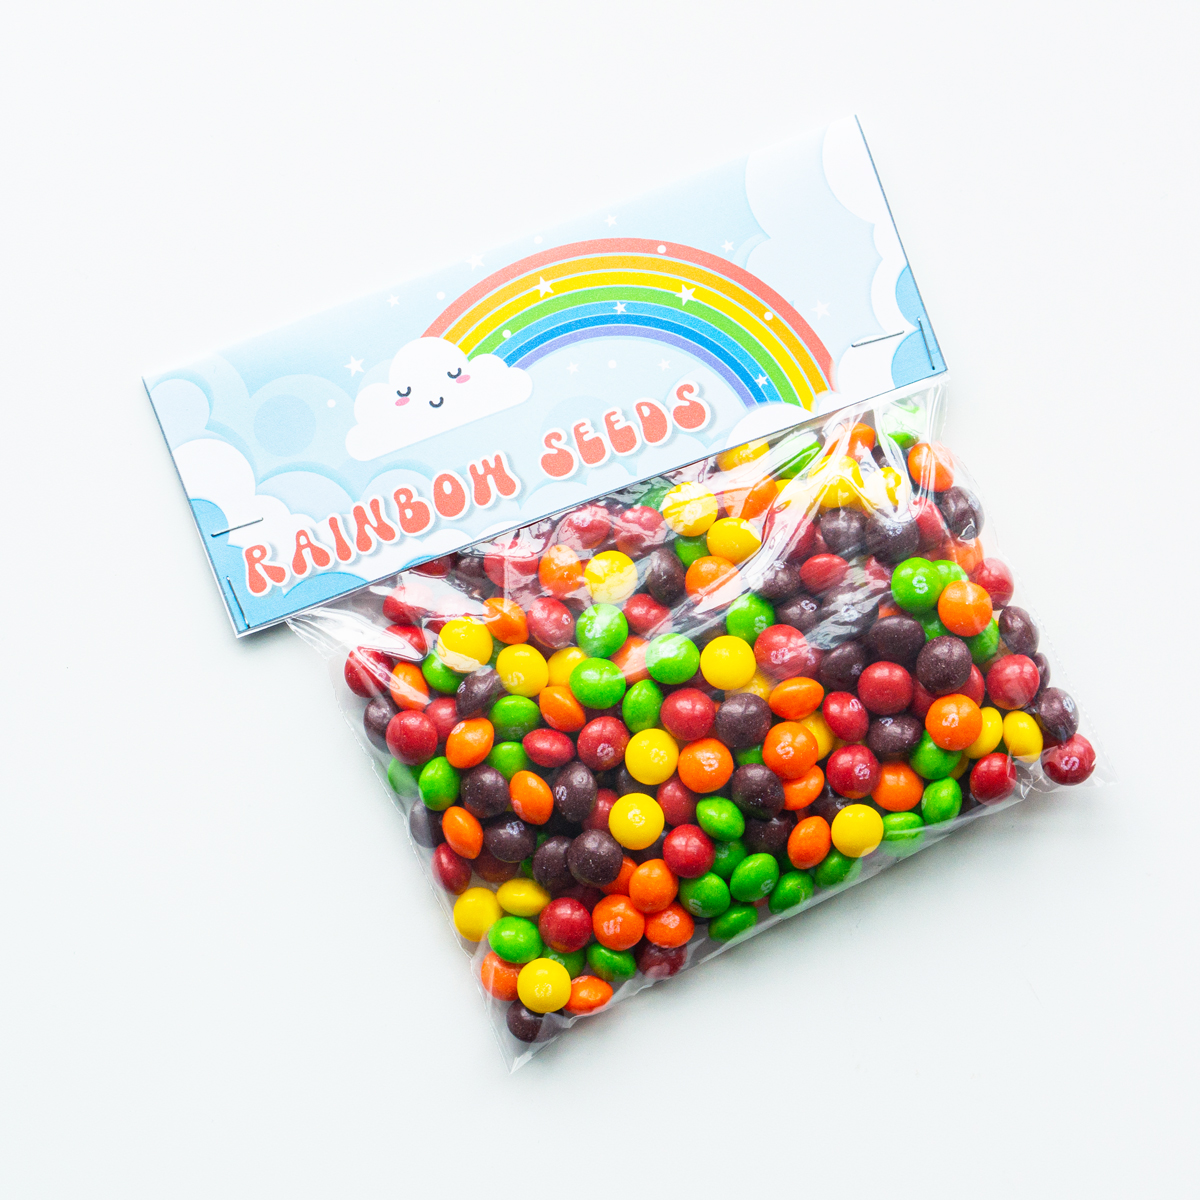 This image shows a bag of skittles with a bag topper that says rainbow seeds on it with a picture of a rainbow.